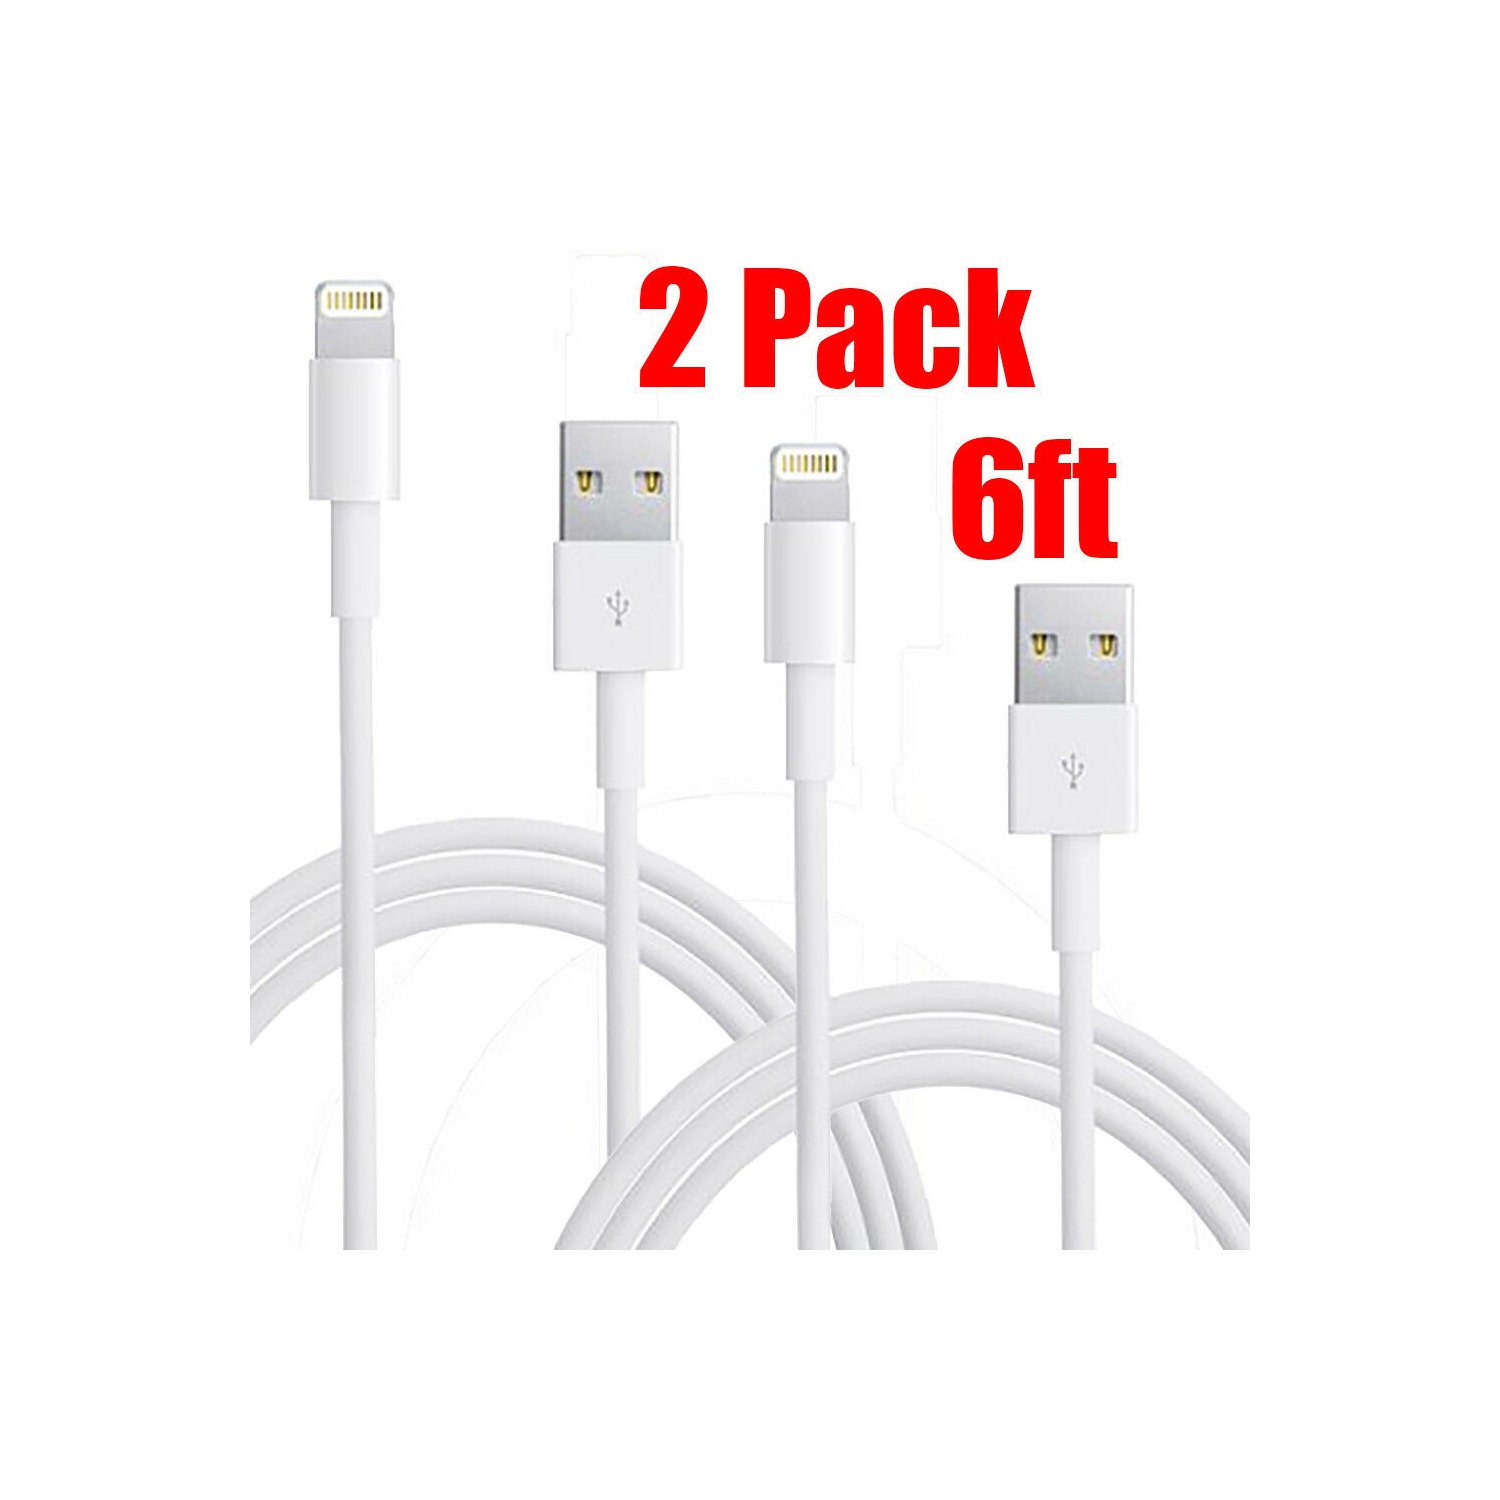 [2 Pks] (6.6Ft / 2m) iPhone iPad Charging Cable Charger Cord Lightning to USB Cable COMPATIBLE for iPod iPad iPhone Pro Max